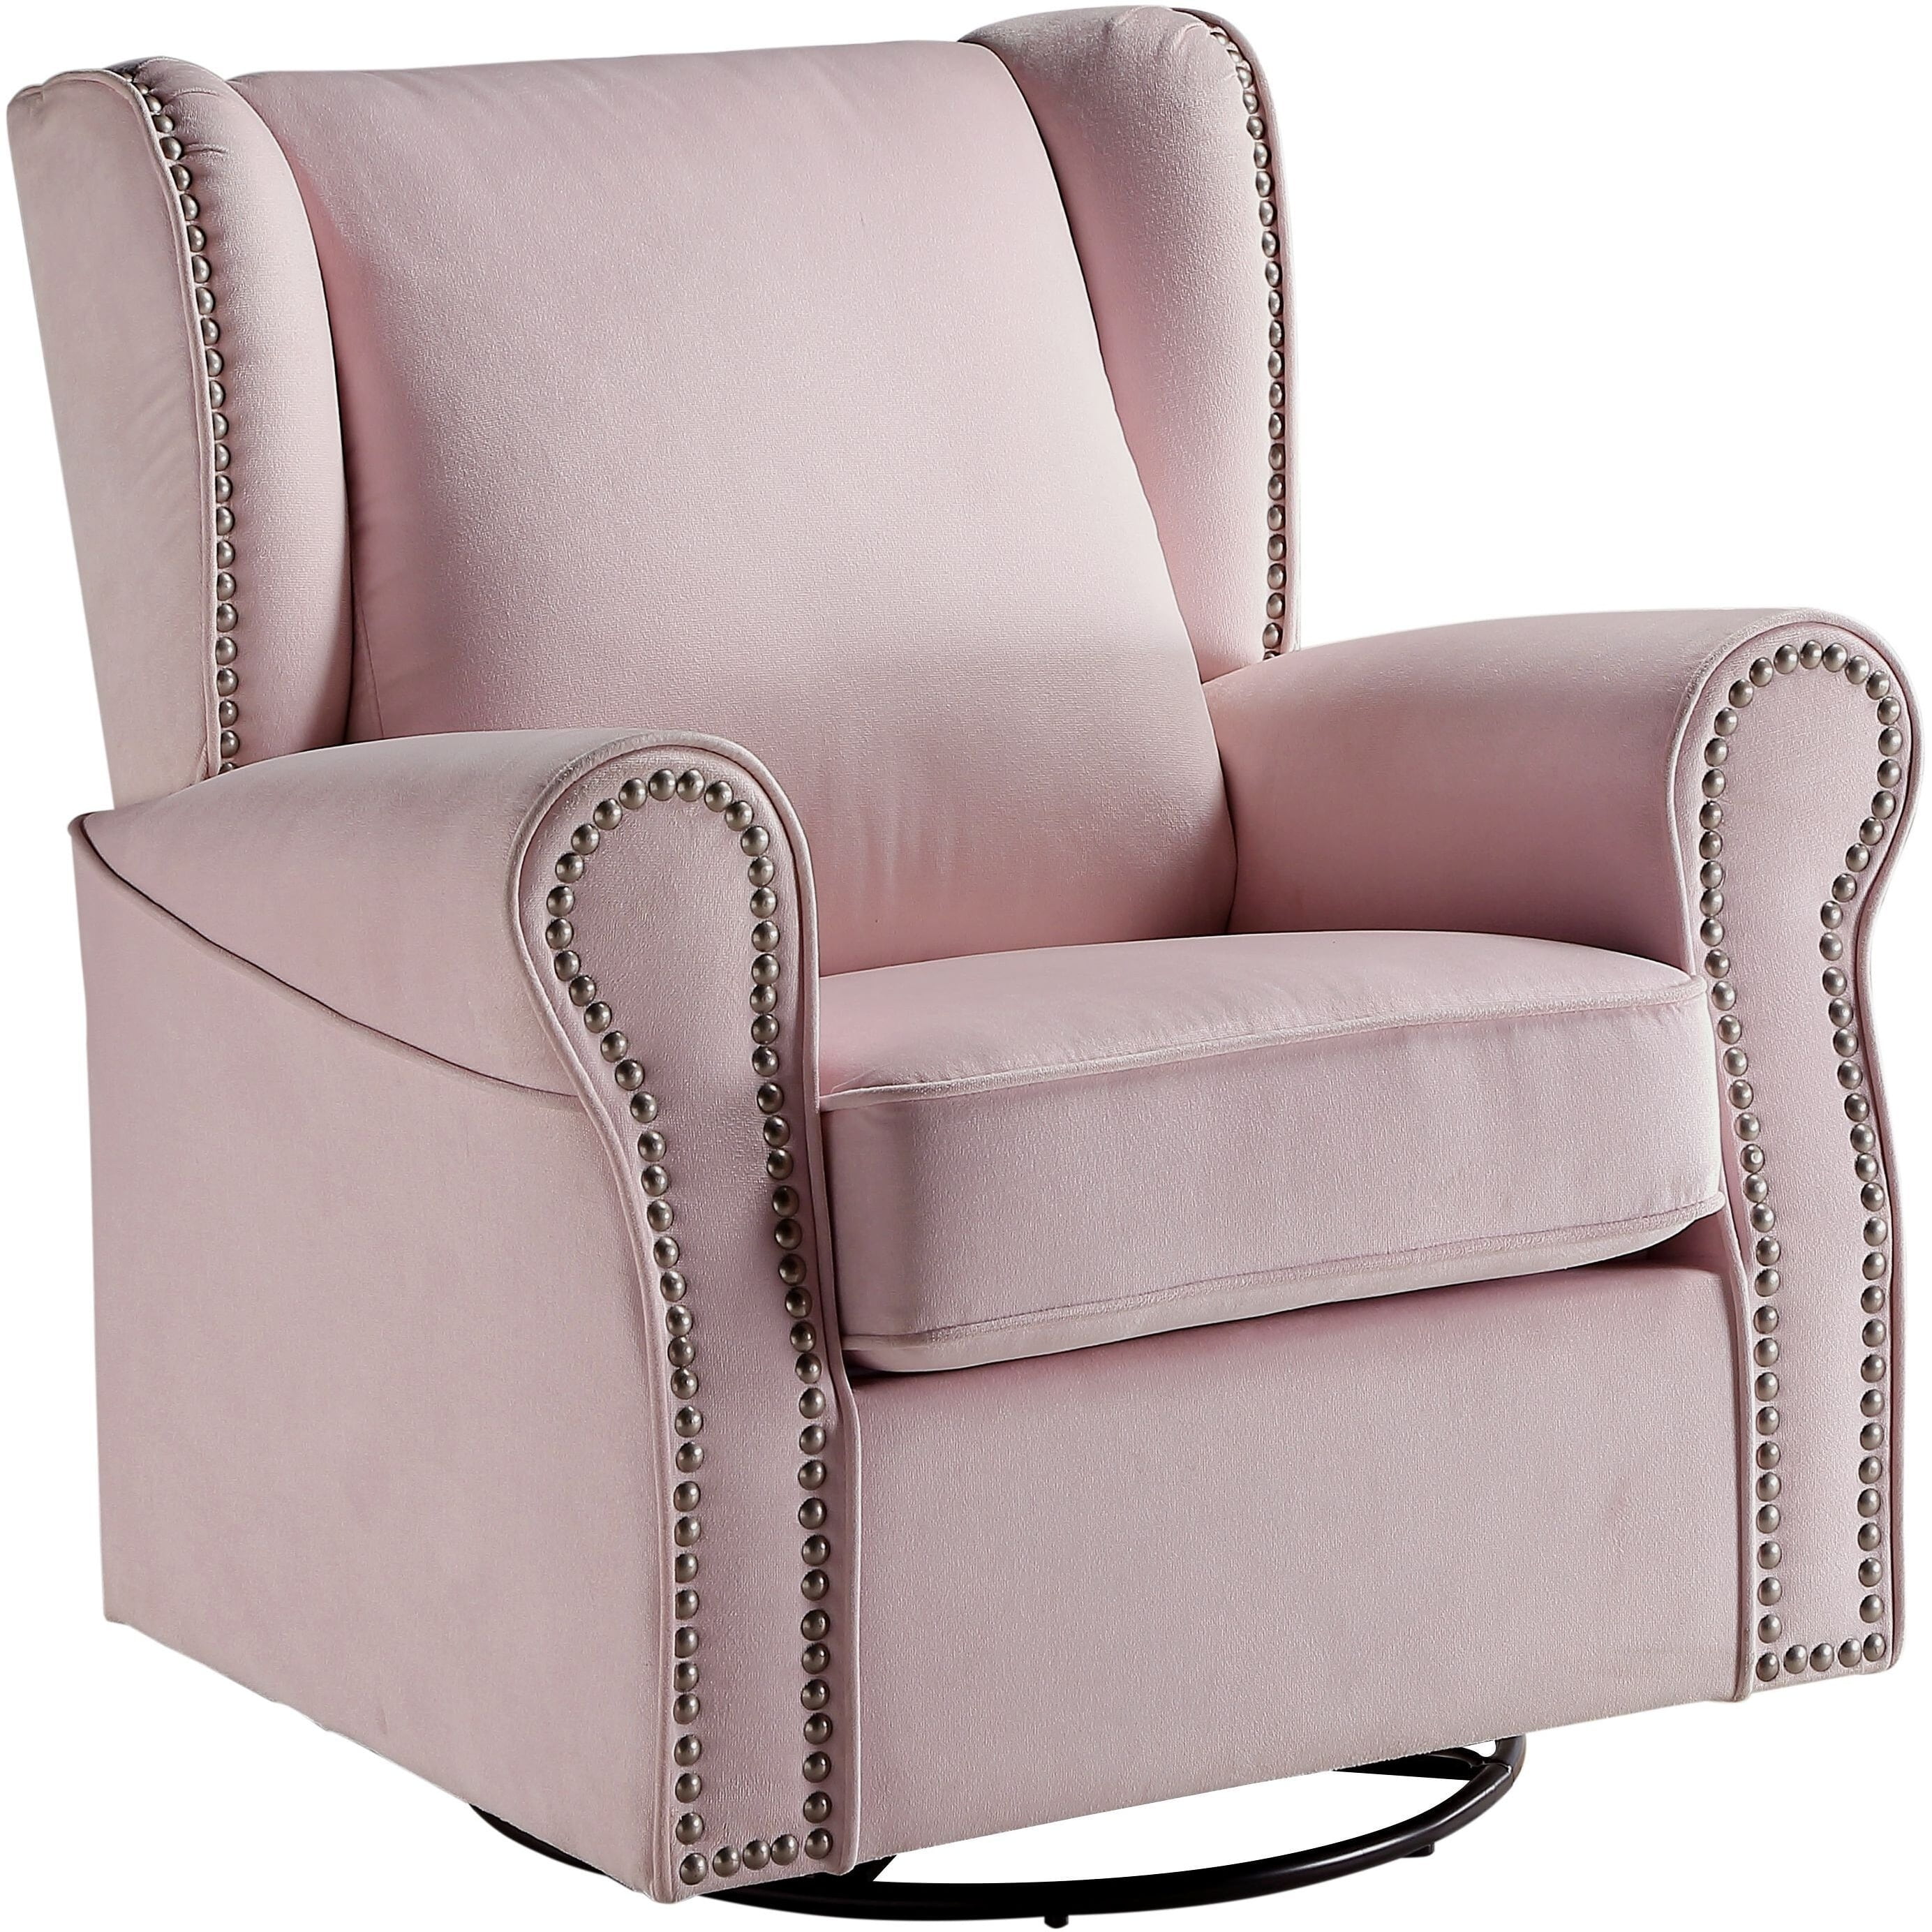 Picture of Acme Furniture LV00923 35 x 34 x 37 in. Tamaki Swivel Chair with Glider, Pink Fabric